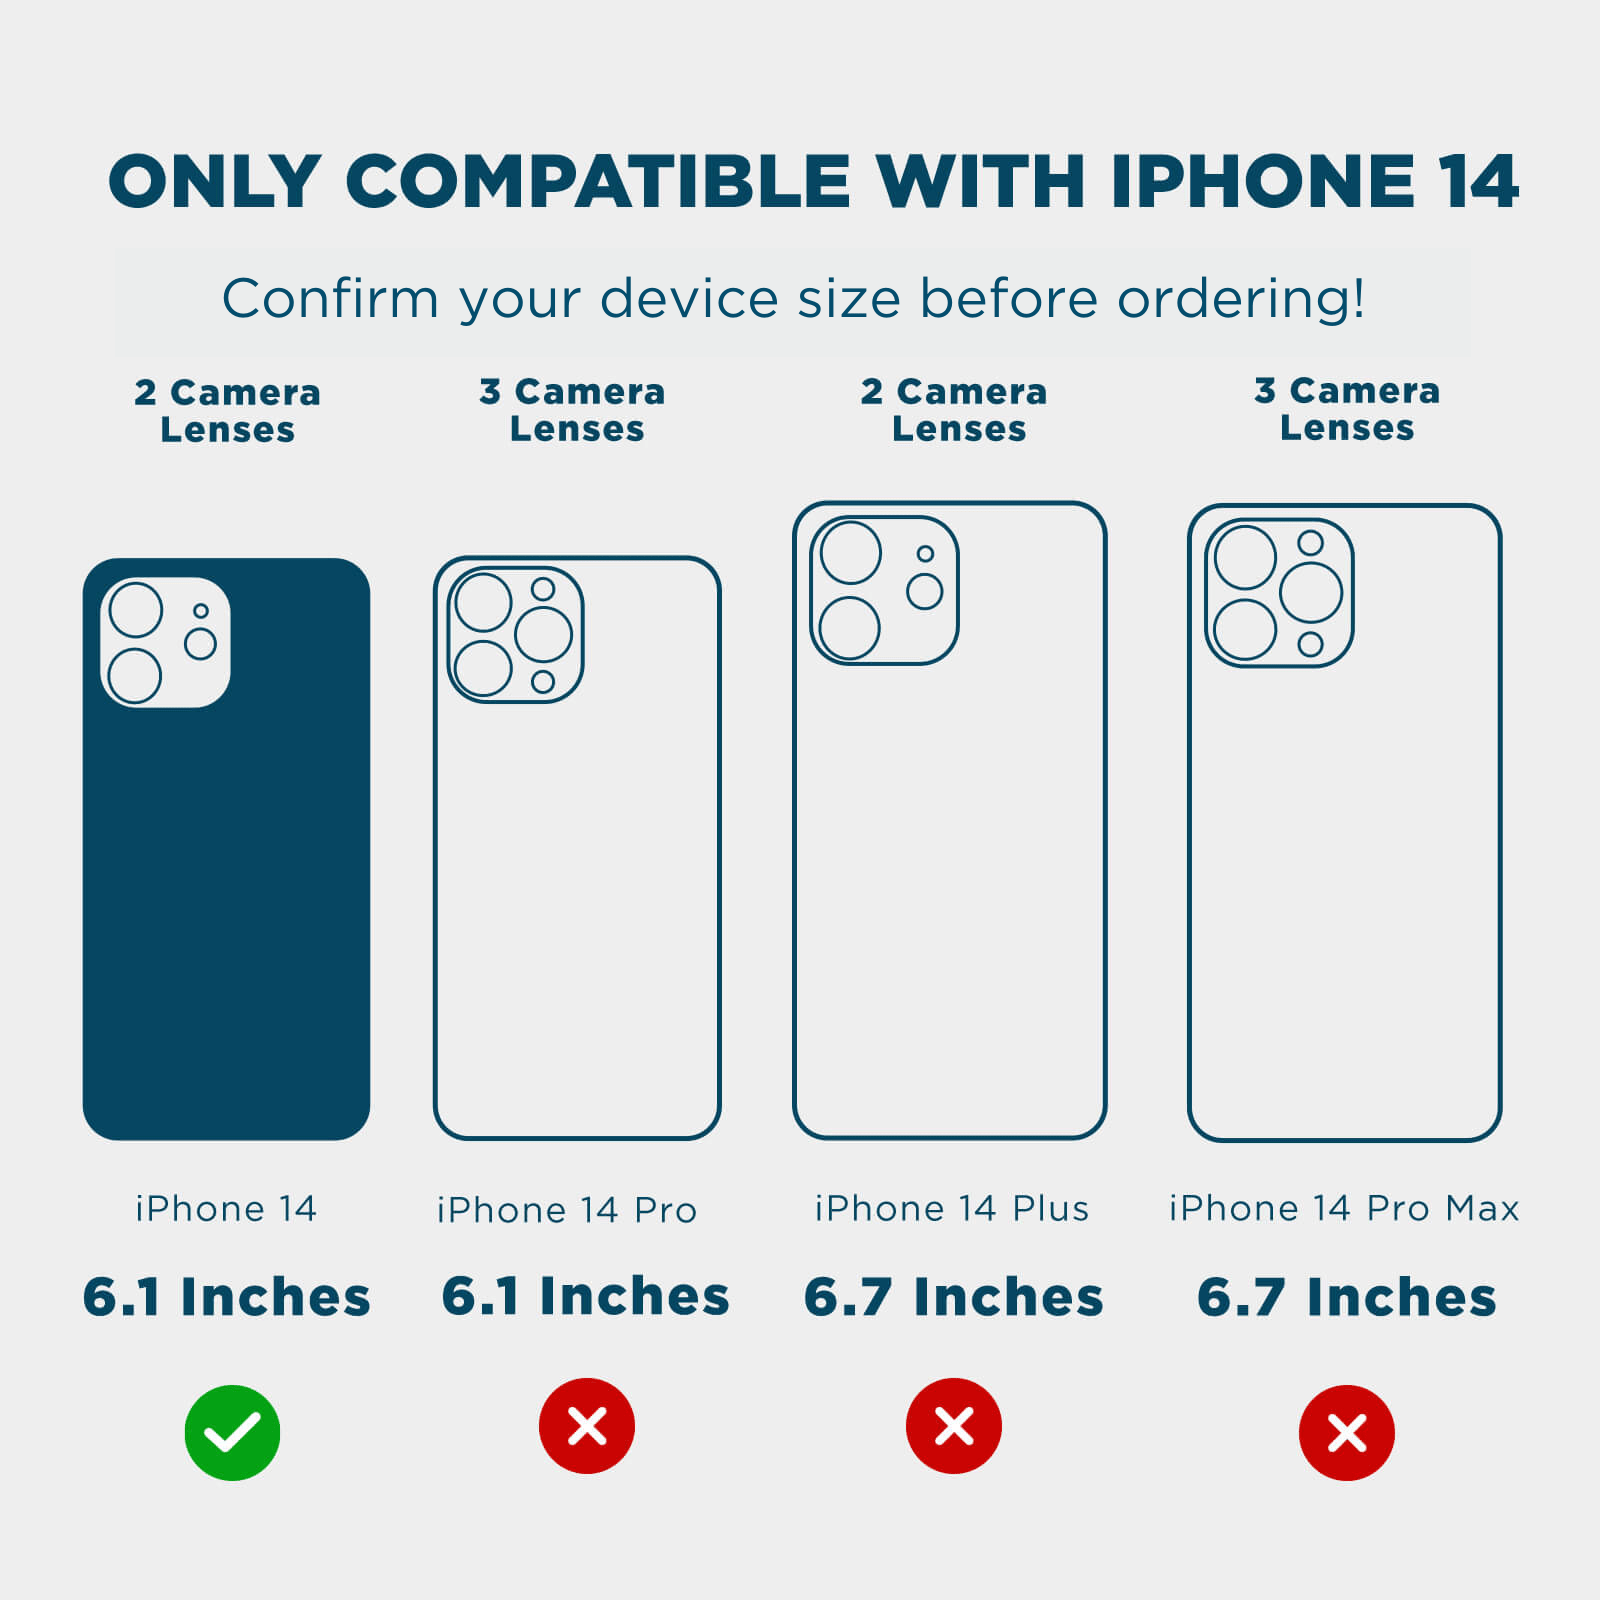 ONLY COMPATIBLE WITH IPHONE 14 CONFIRM YOUR DEVICE SIZE BEFORE ORDERING! 2 CAMERA LENSES, 3 CAMERA LENSES, 2 CAMERA LENSES, 3 CAMERA LENSES. IPHONE 14 6.1" IPHONE 14 PRO 6.1" IPHONE 14 PLUS 6.7" IPHONE 14 PRO MAX 6.7". COLOR::clear